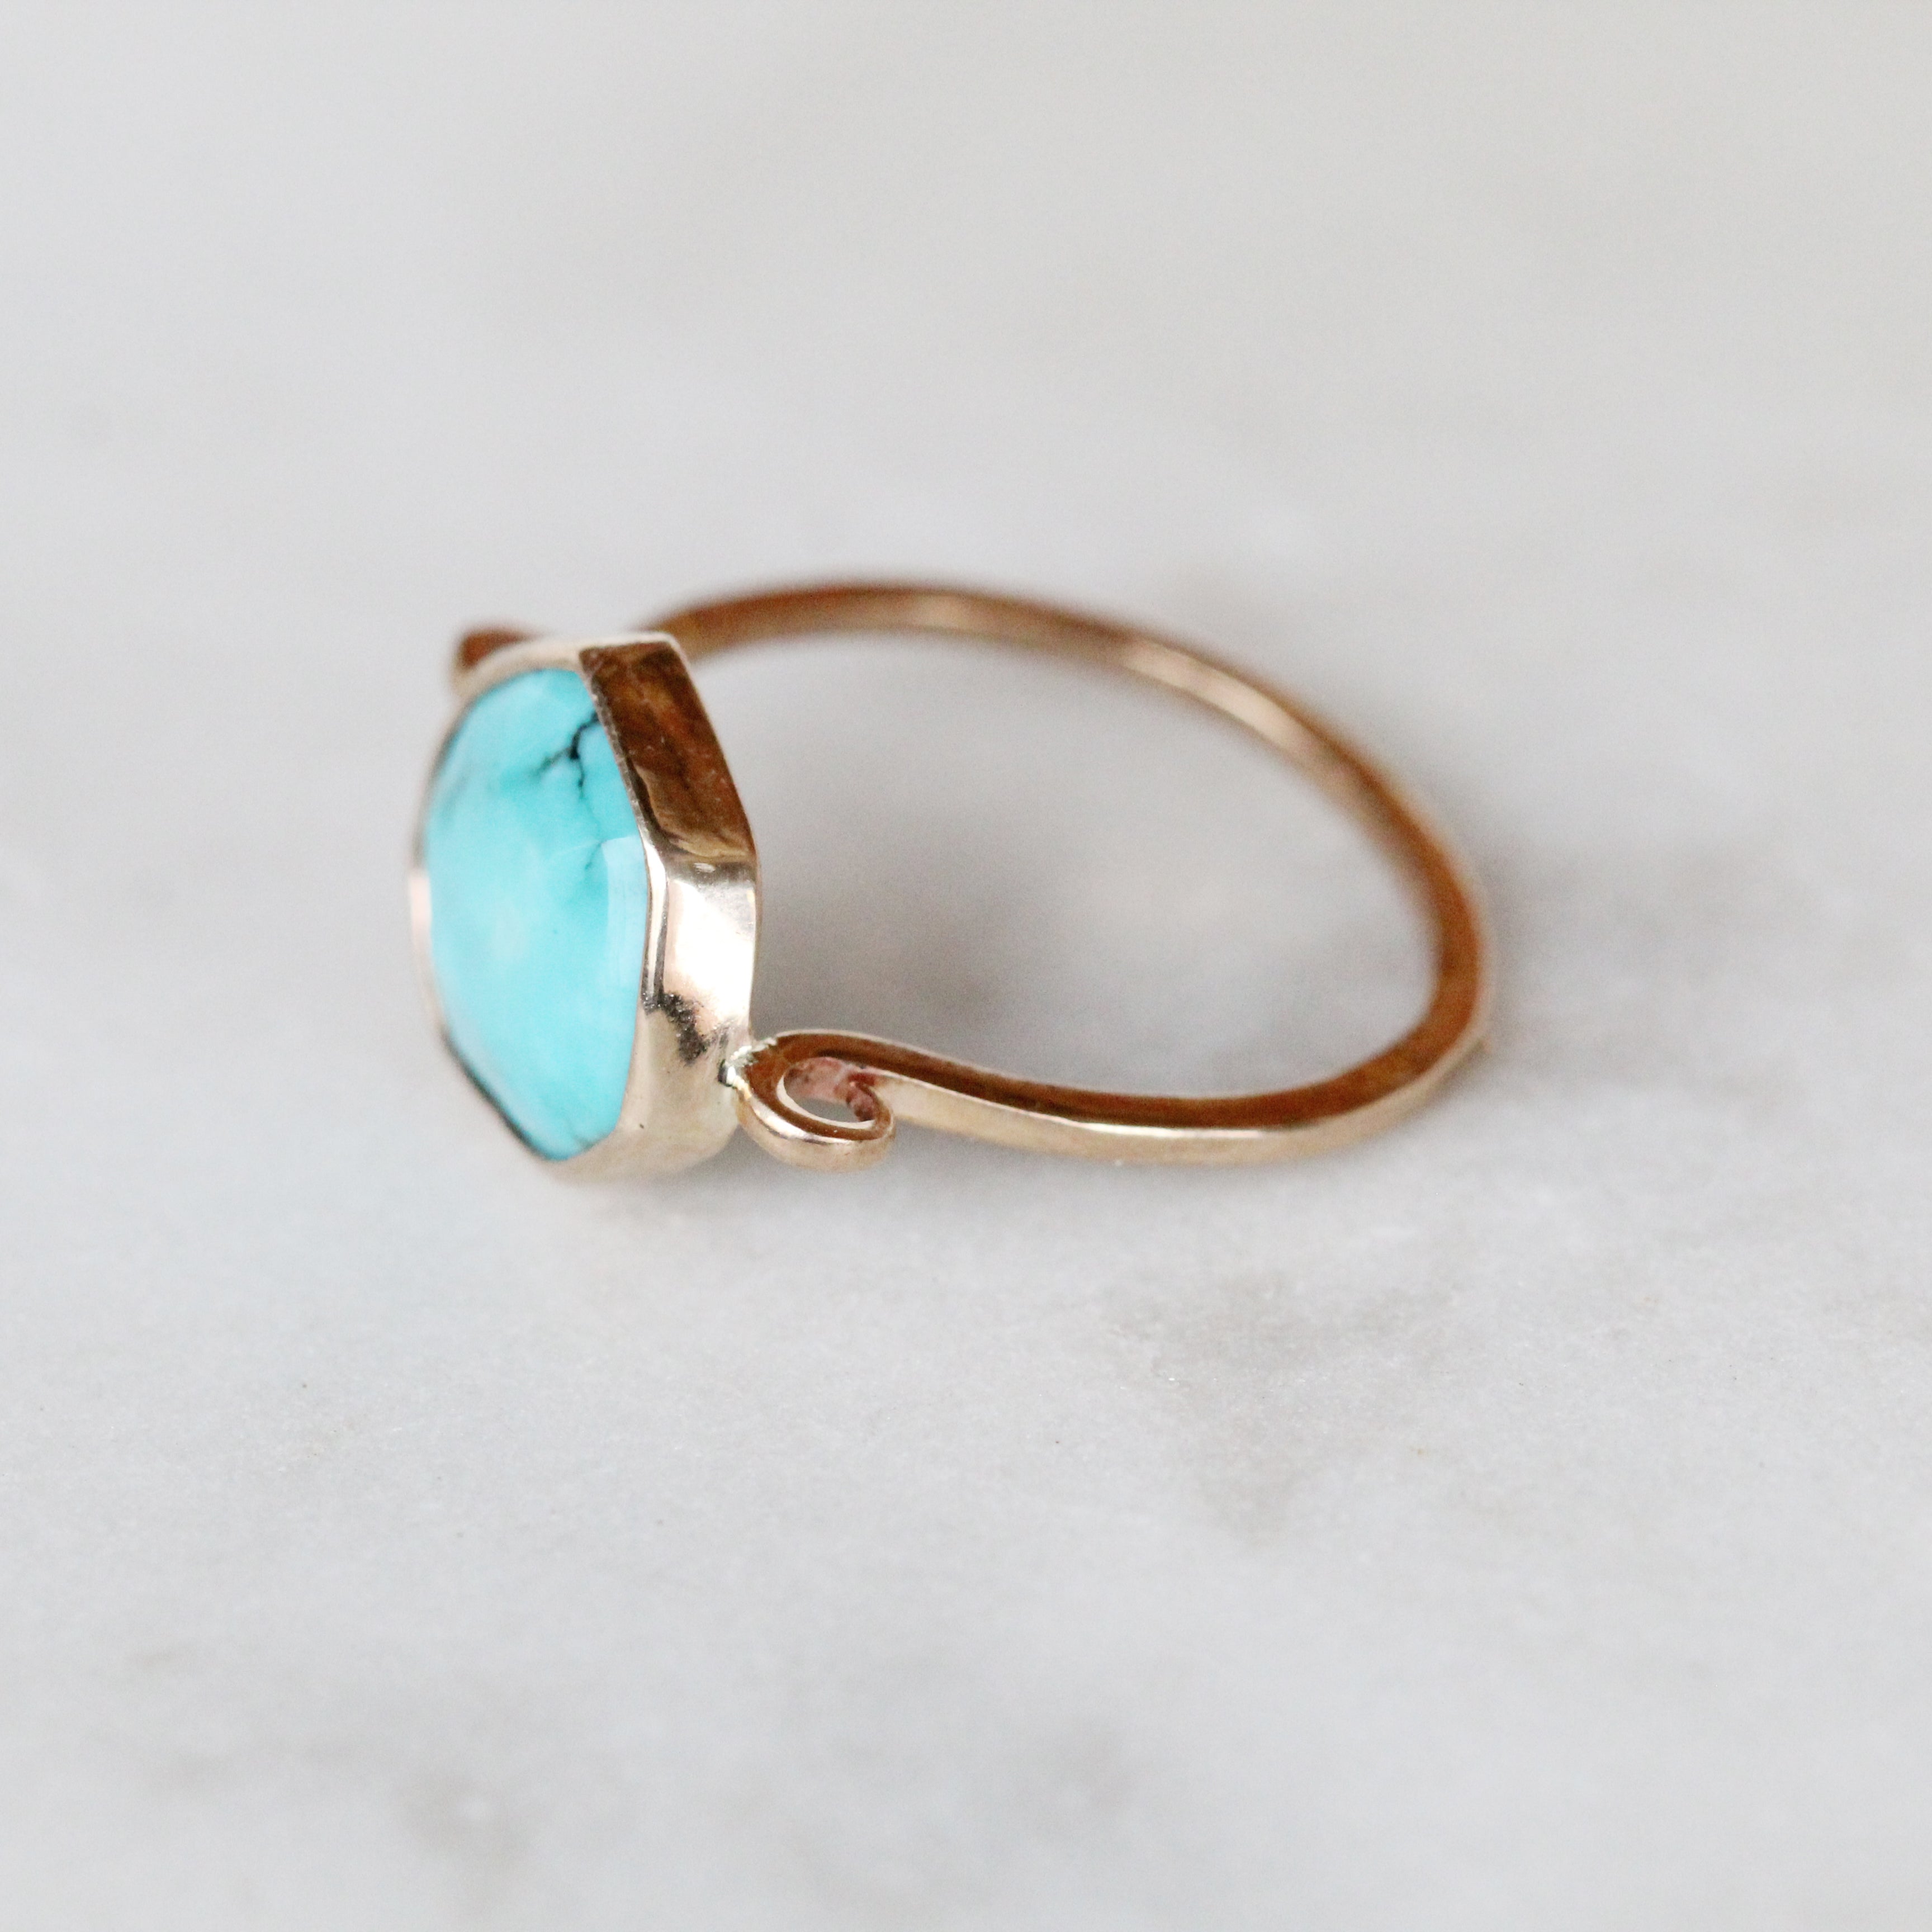 Aegean Sea Ring with a 3.2 Carat Bezel Set Turquoise in 14k Yellow Gold ...